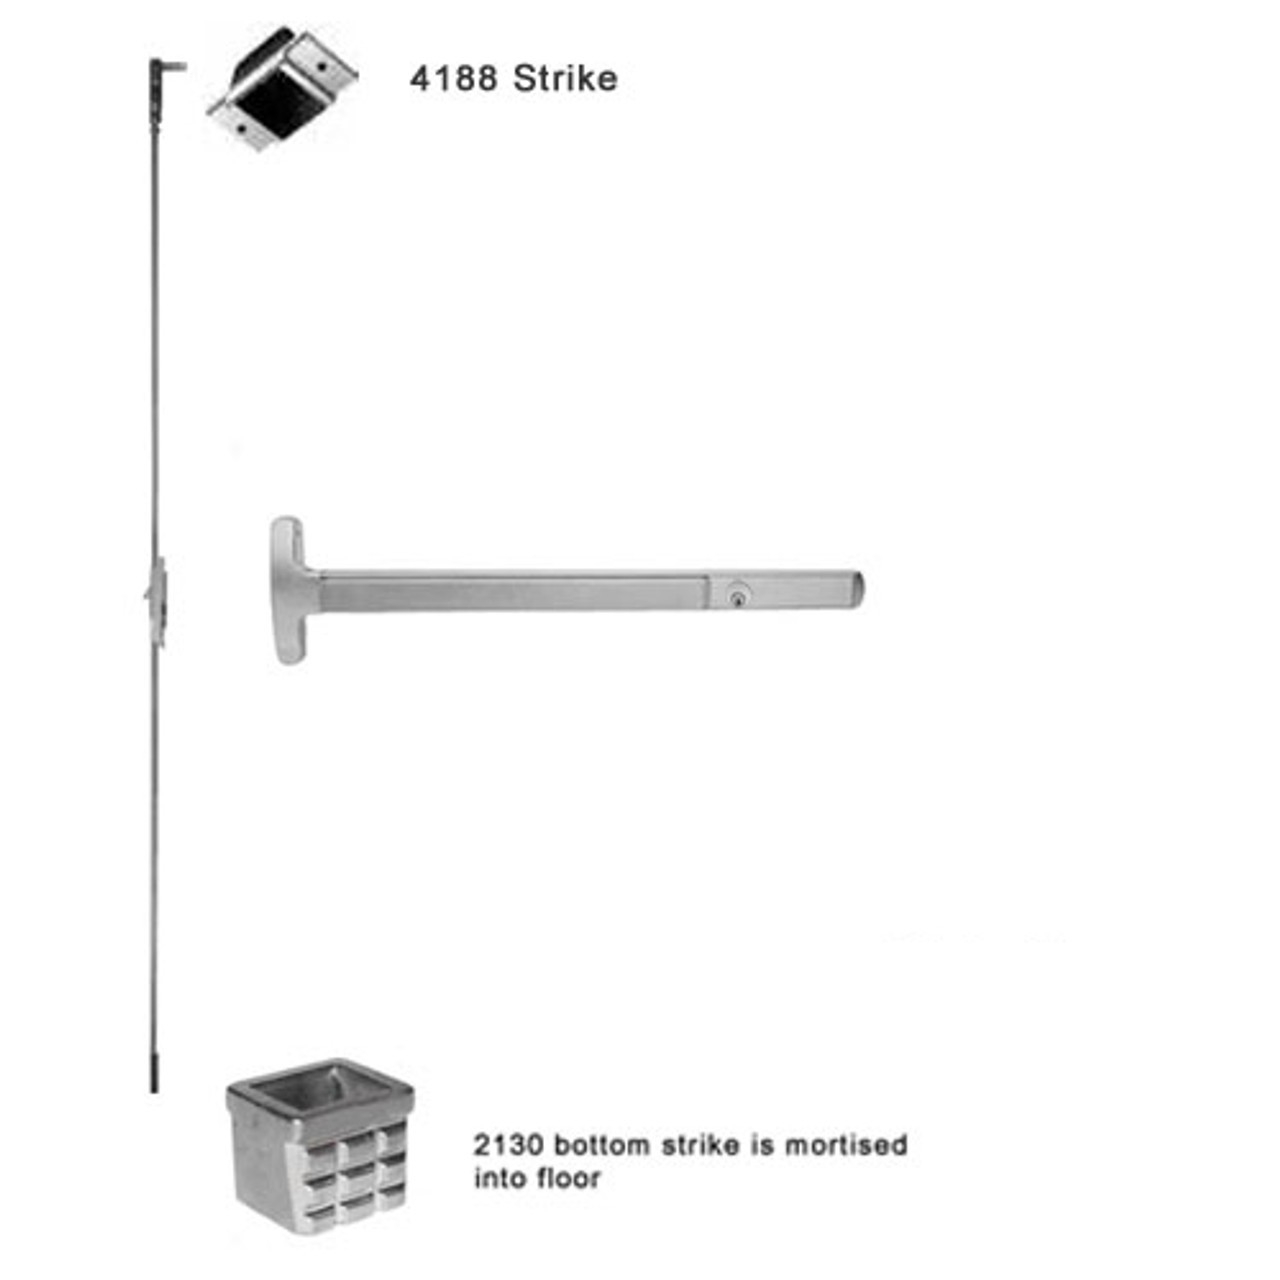 CD24-C-L-BE-DANE-US26-3-LHR Falcon 24 Series Concealed Vertical Rod Device 712L-BE Dane Lever Trim with Blank Escutcheon in Polished Chrome